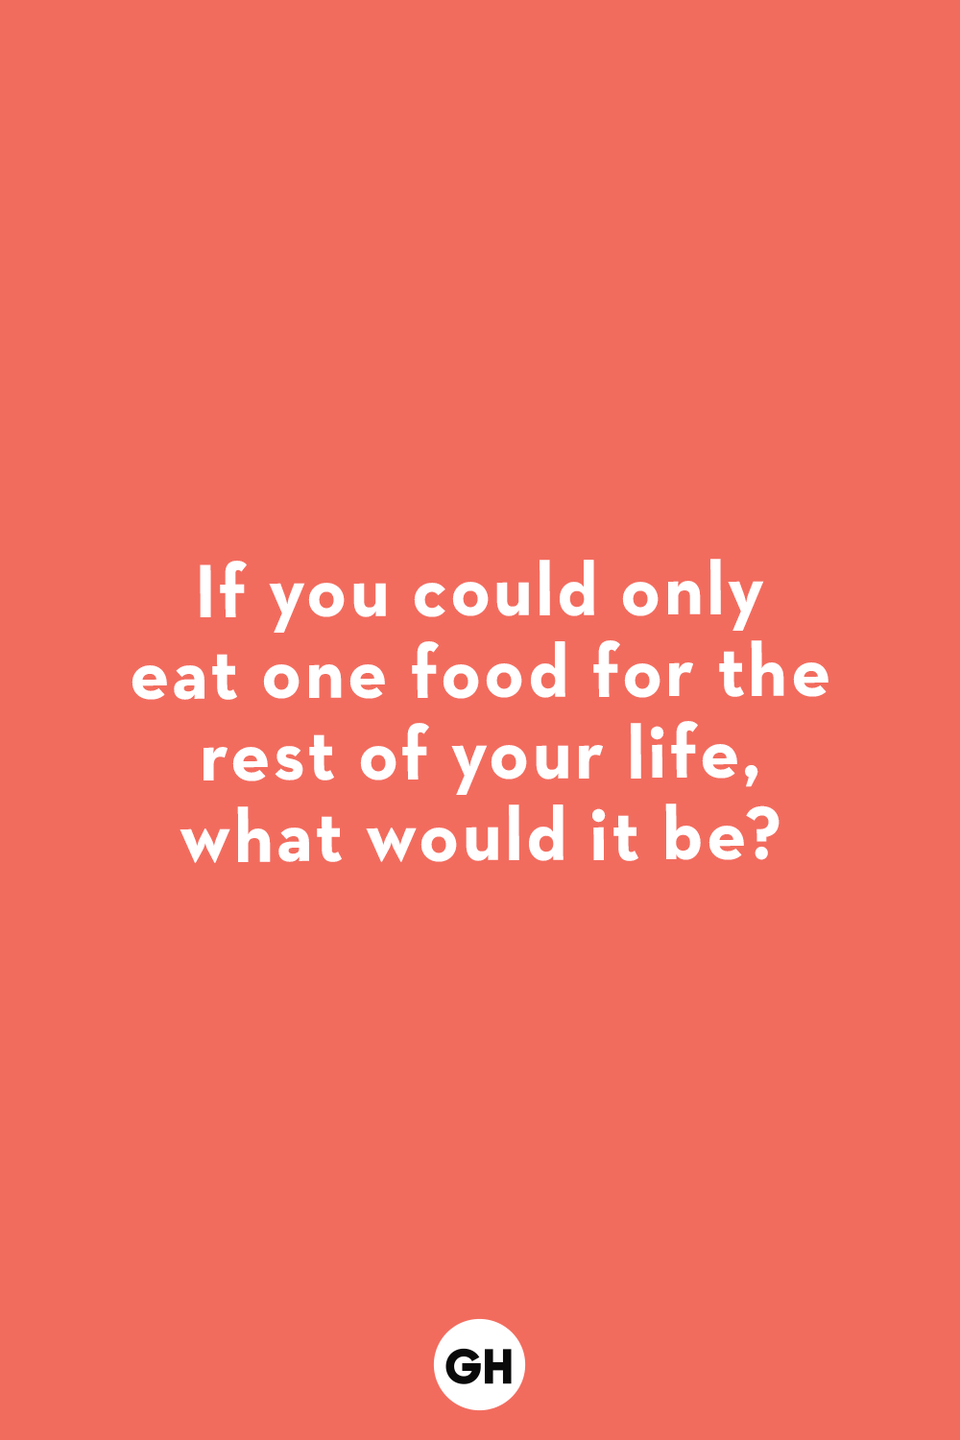 a question card for kids asks if you could only eat one food for the rest of your life, what would it be